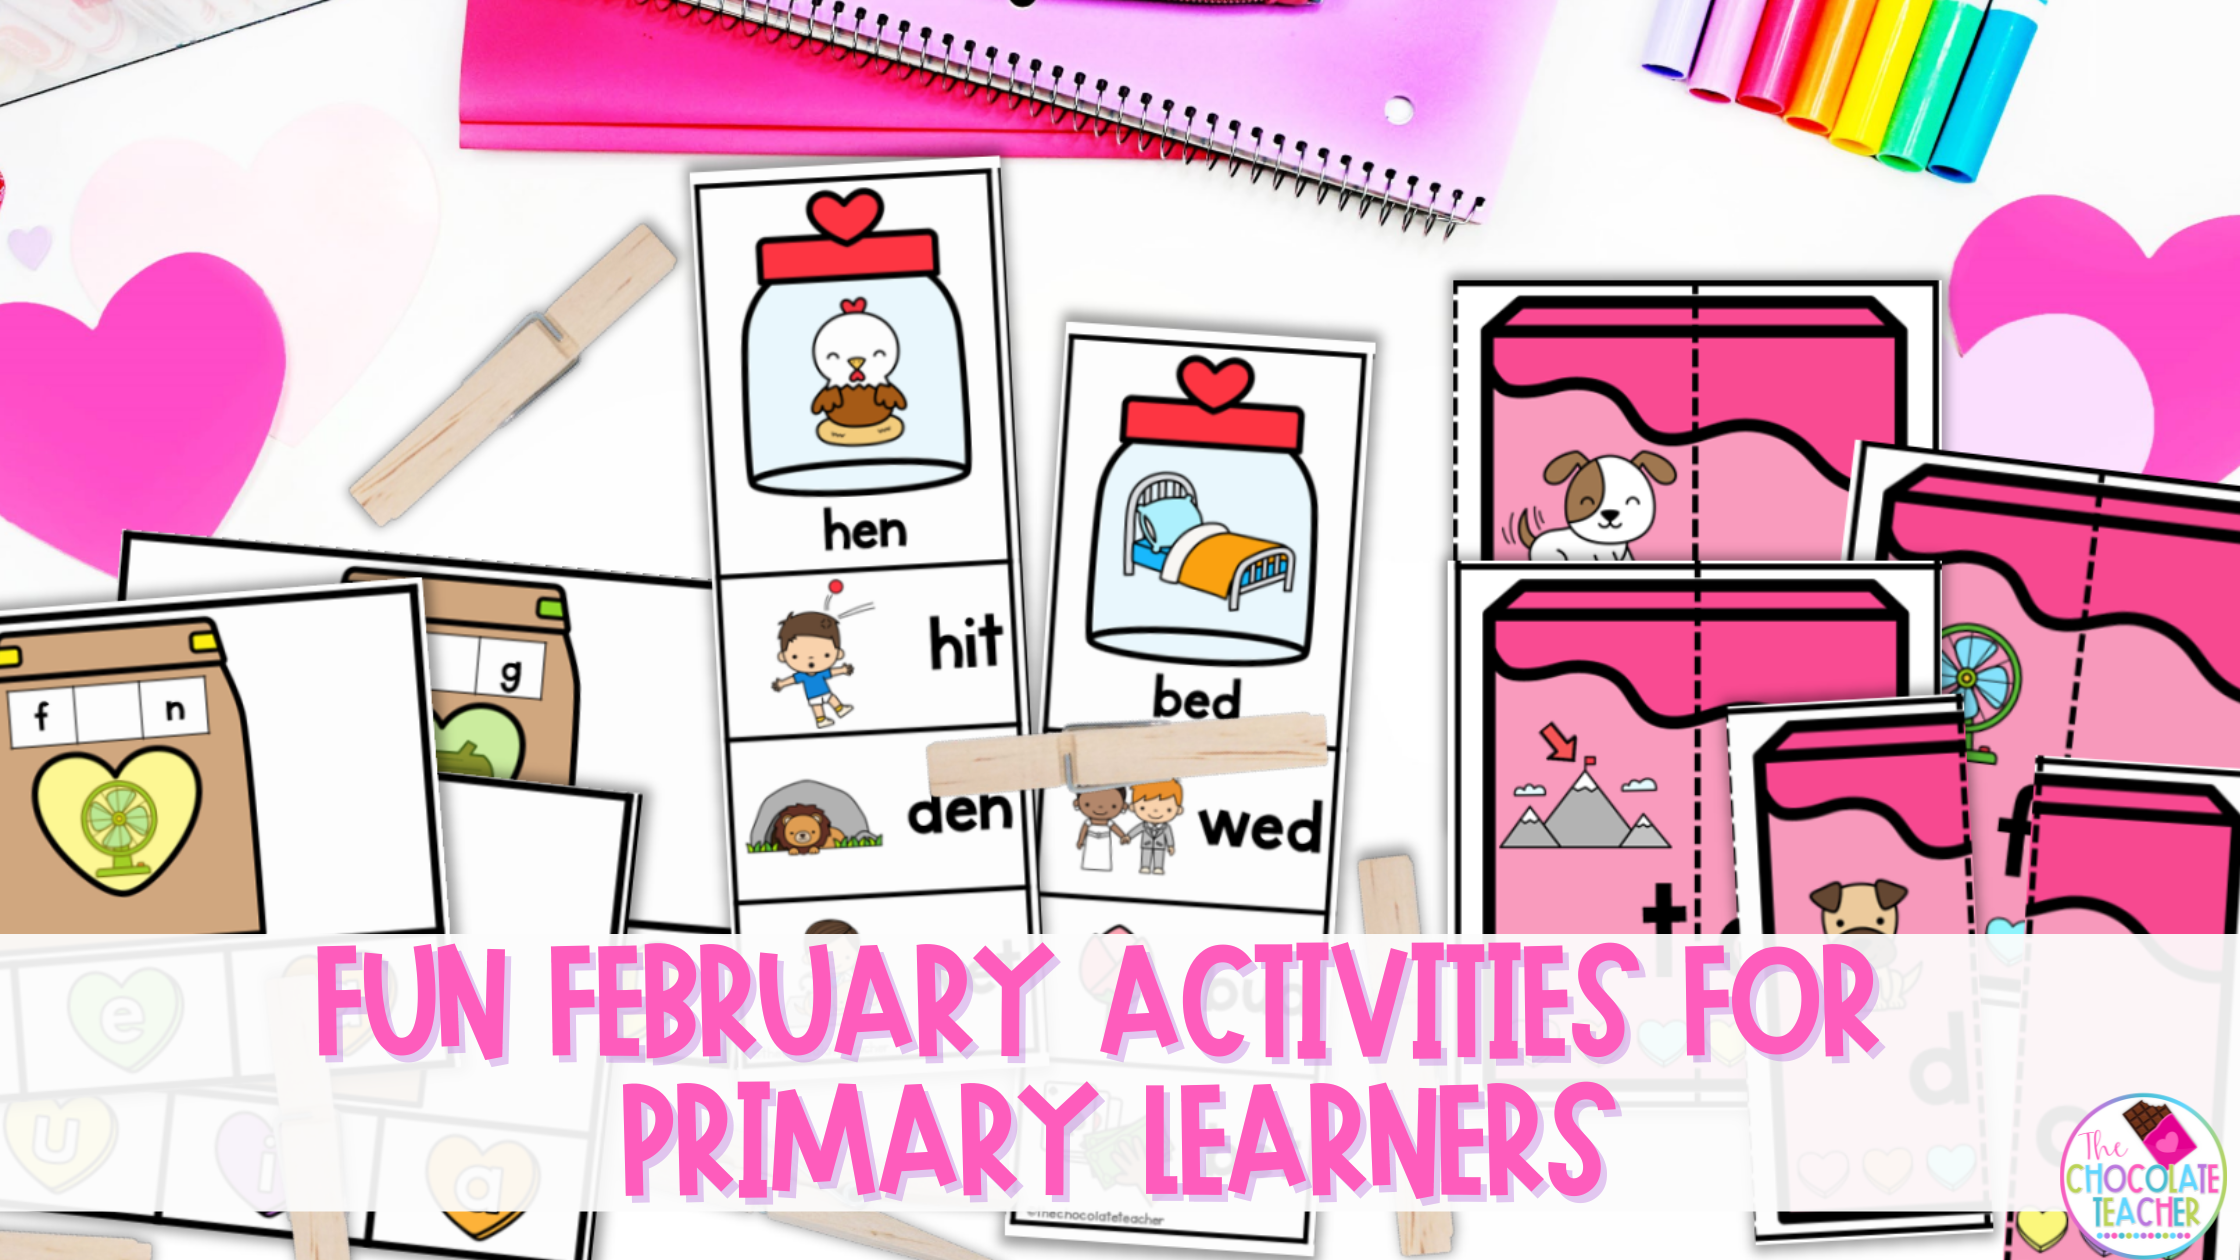 Take your February activities to the next level with these fantastic activities full of sweet learning opportunities to last the whole month long.